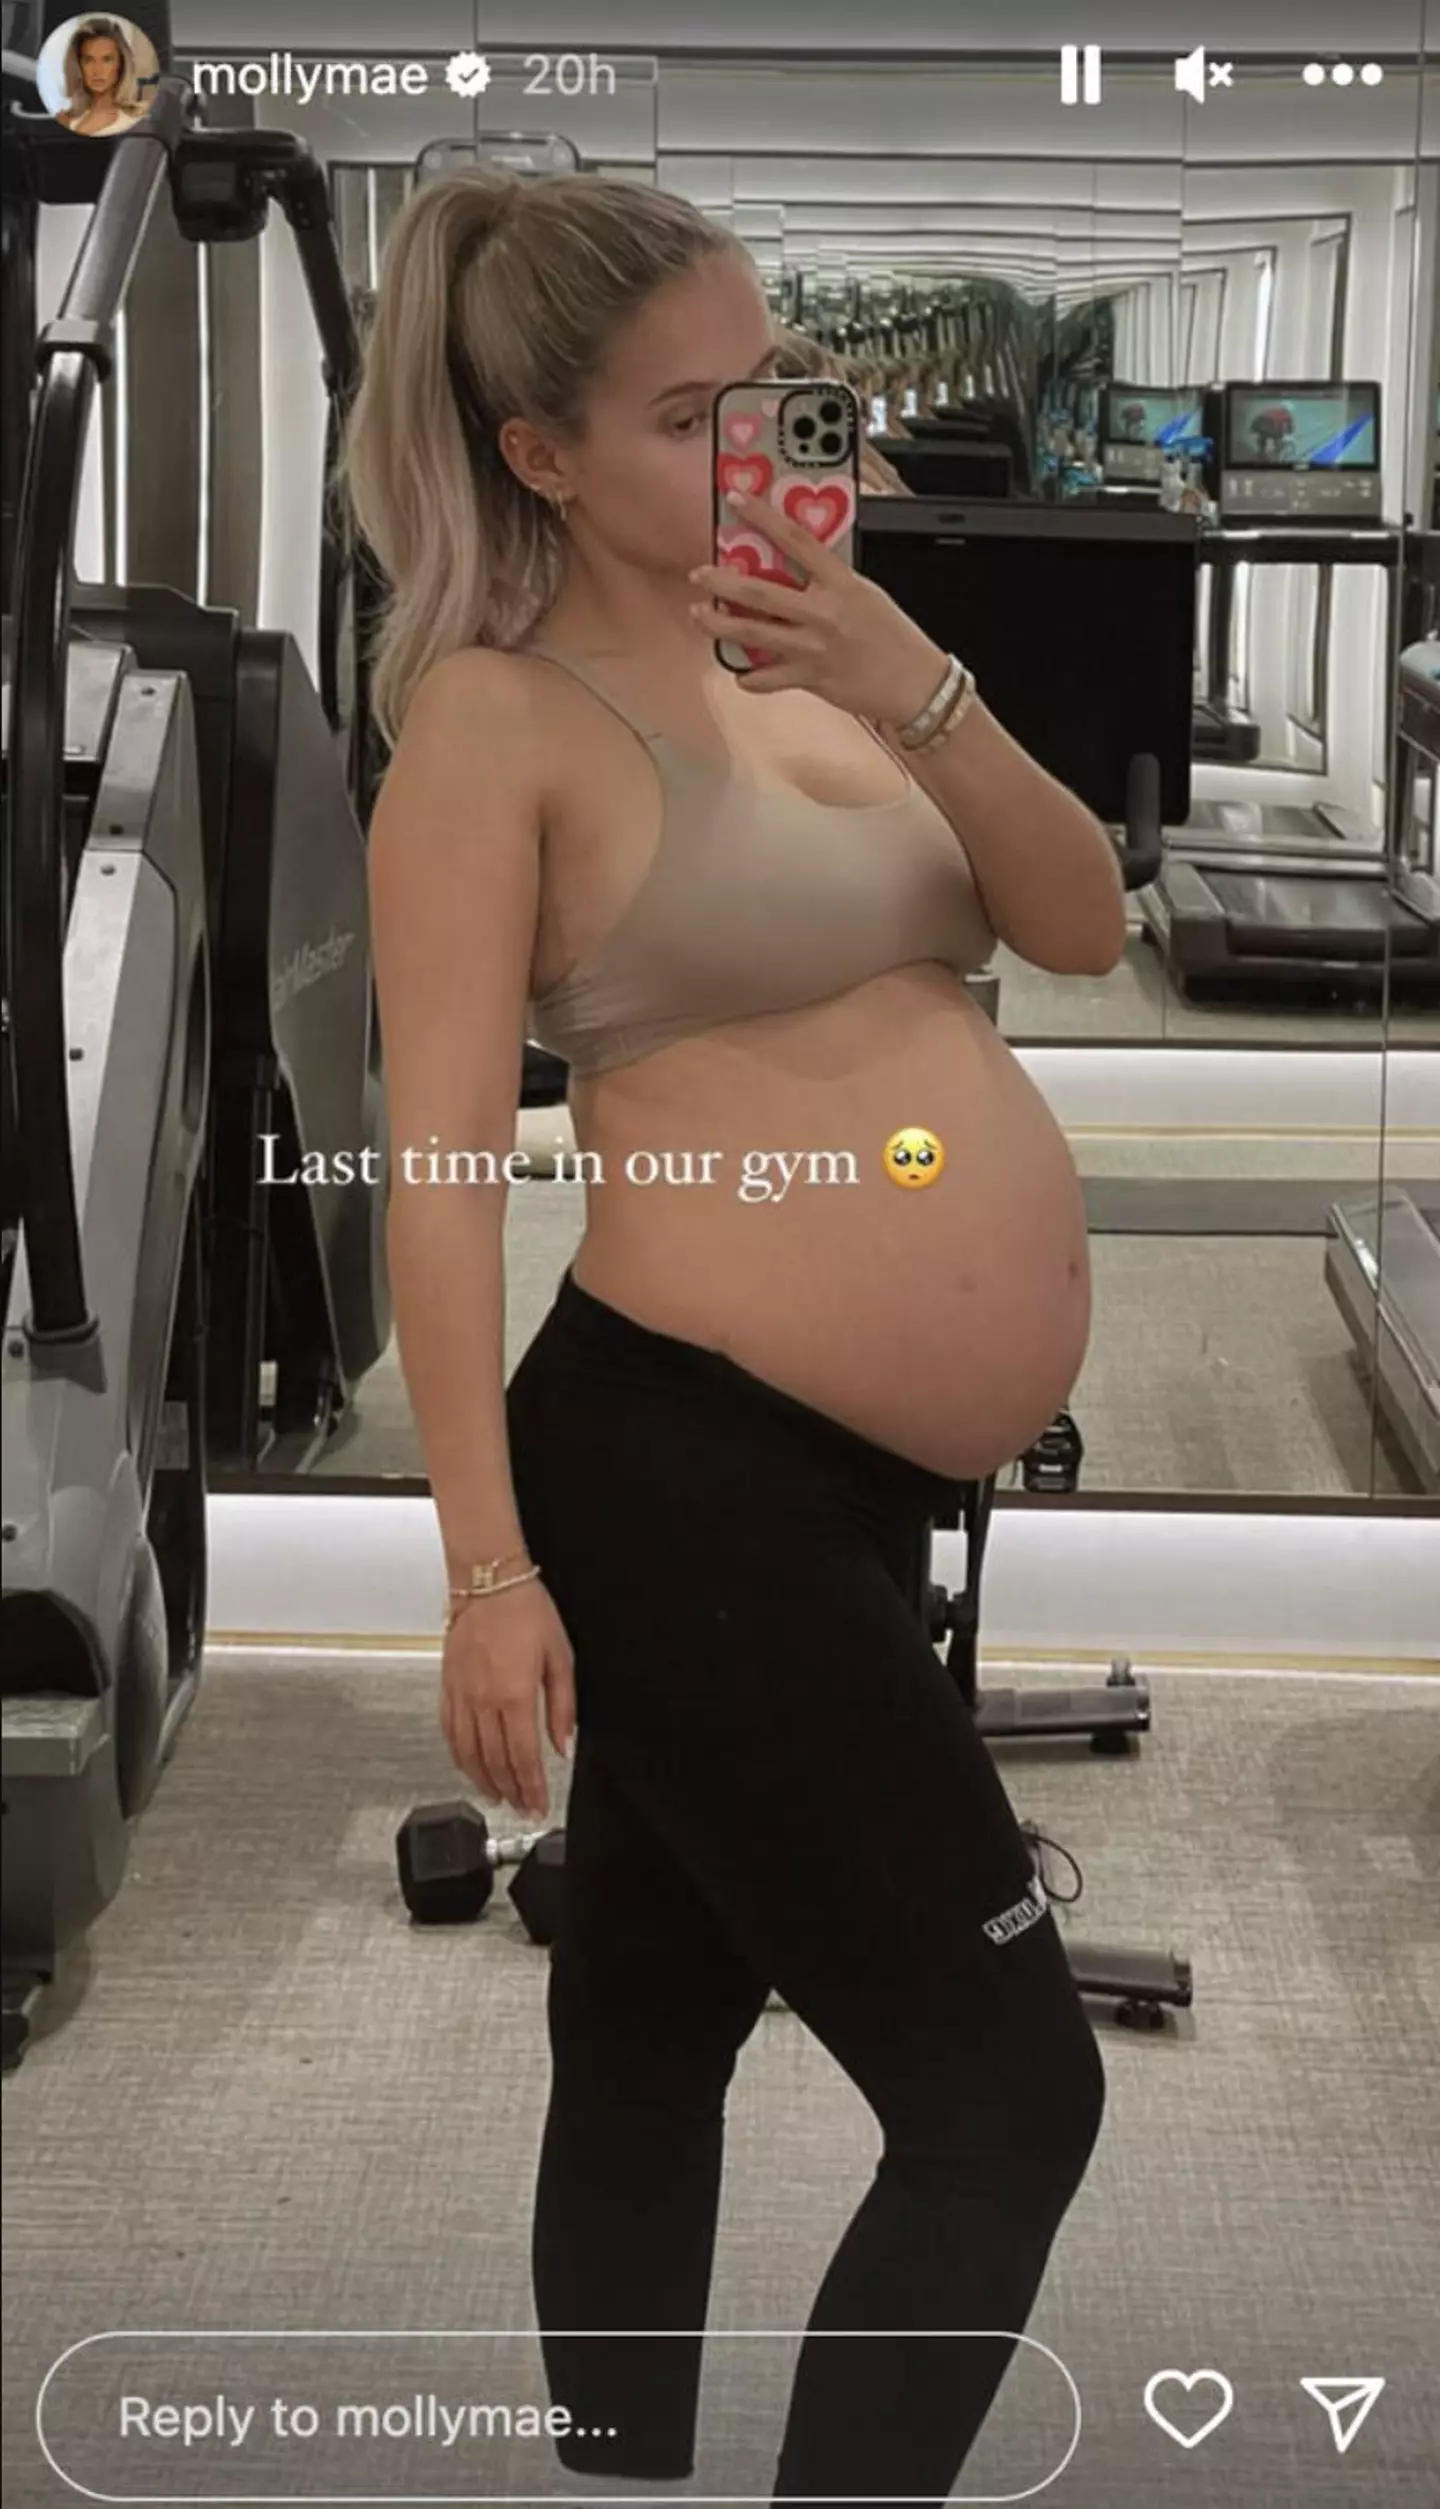 Molly-Mae has also been getting hate for returning to the gym so soon after giving birth.